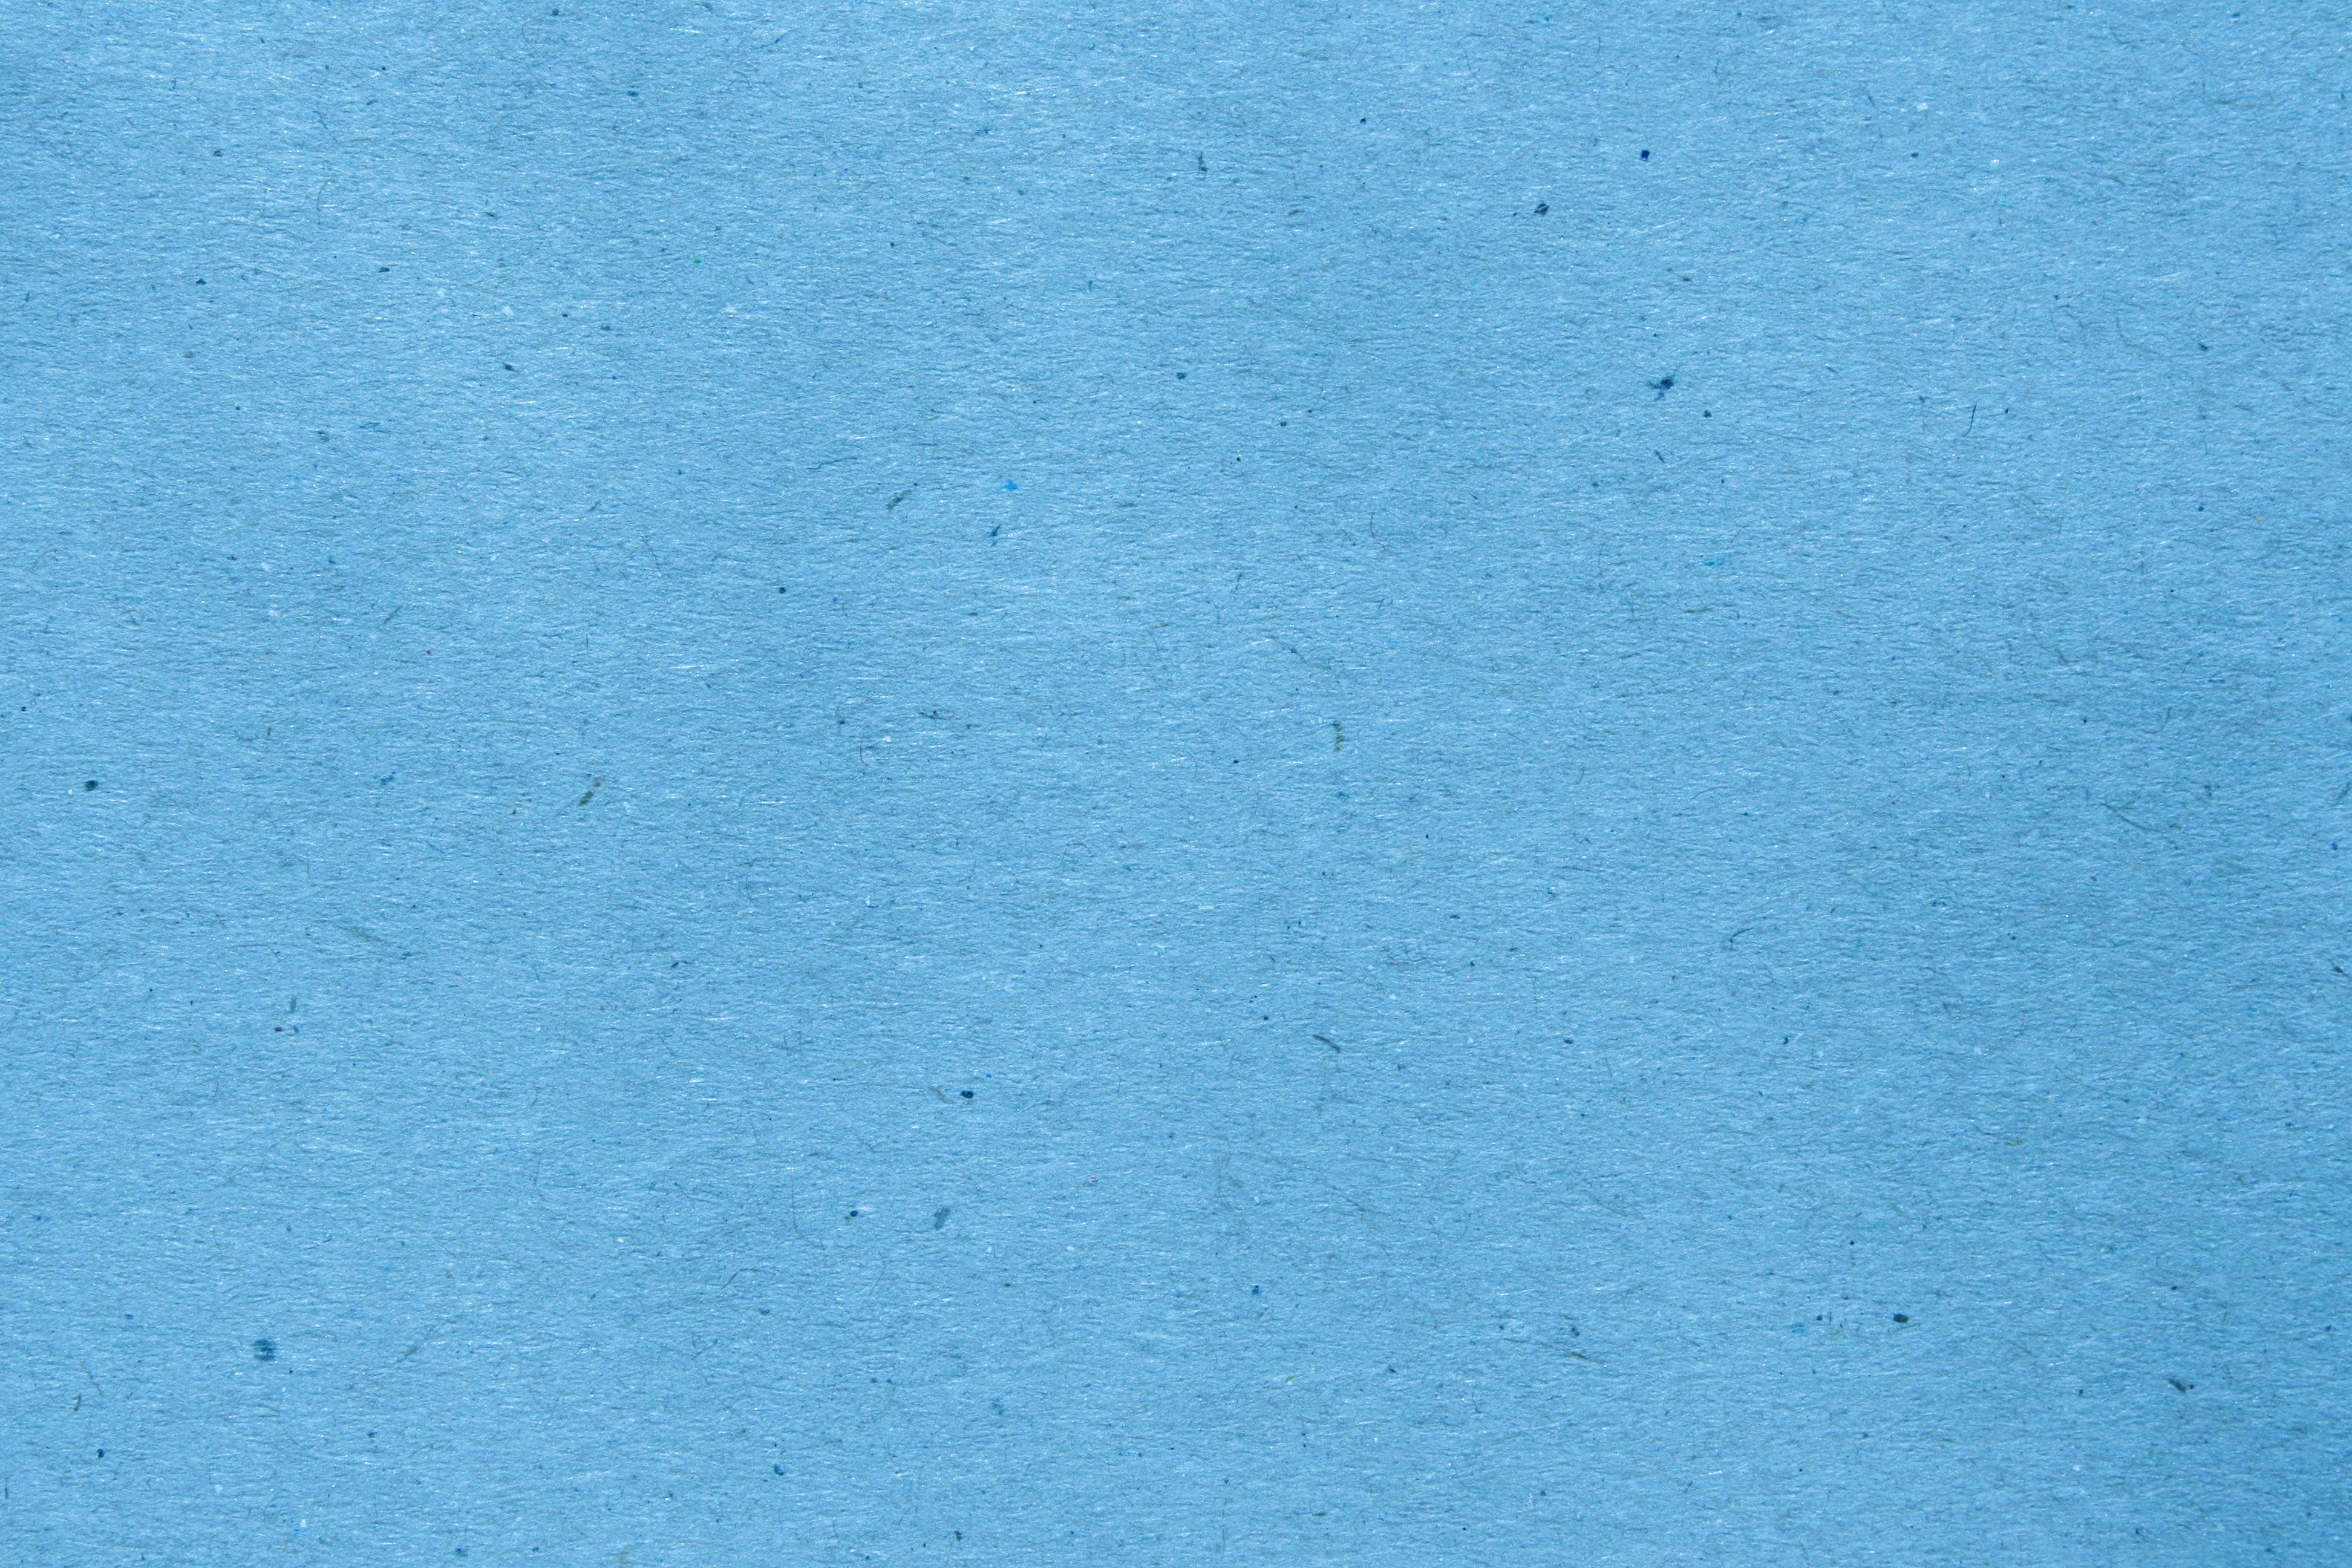 Blue Paper Texture with Flecks Picture | Free Photograph | Photos ...